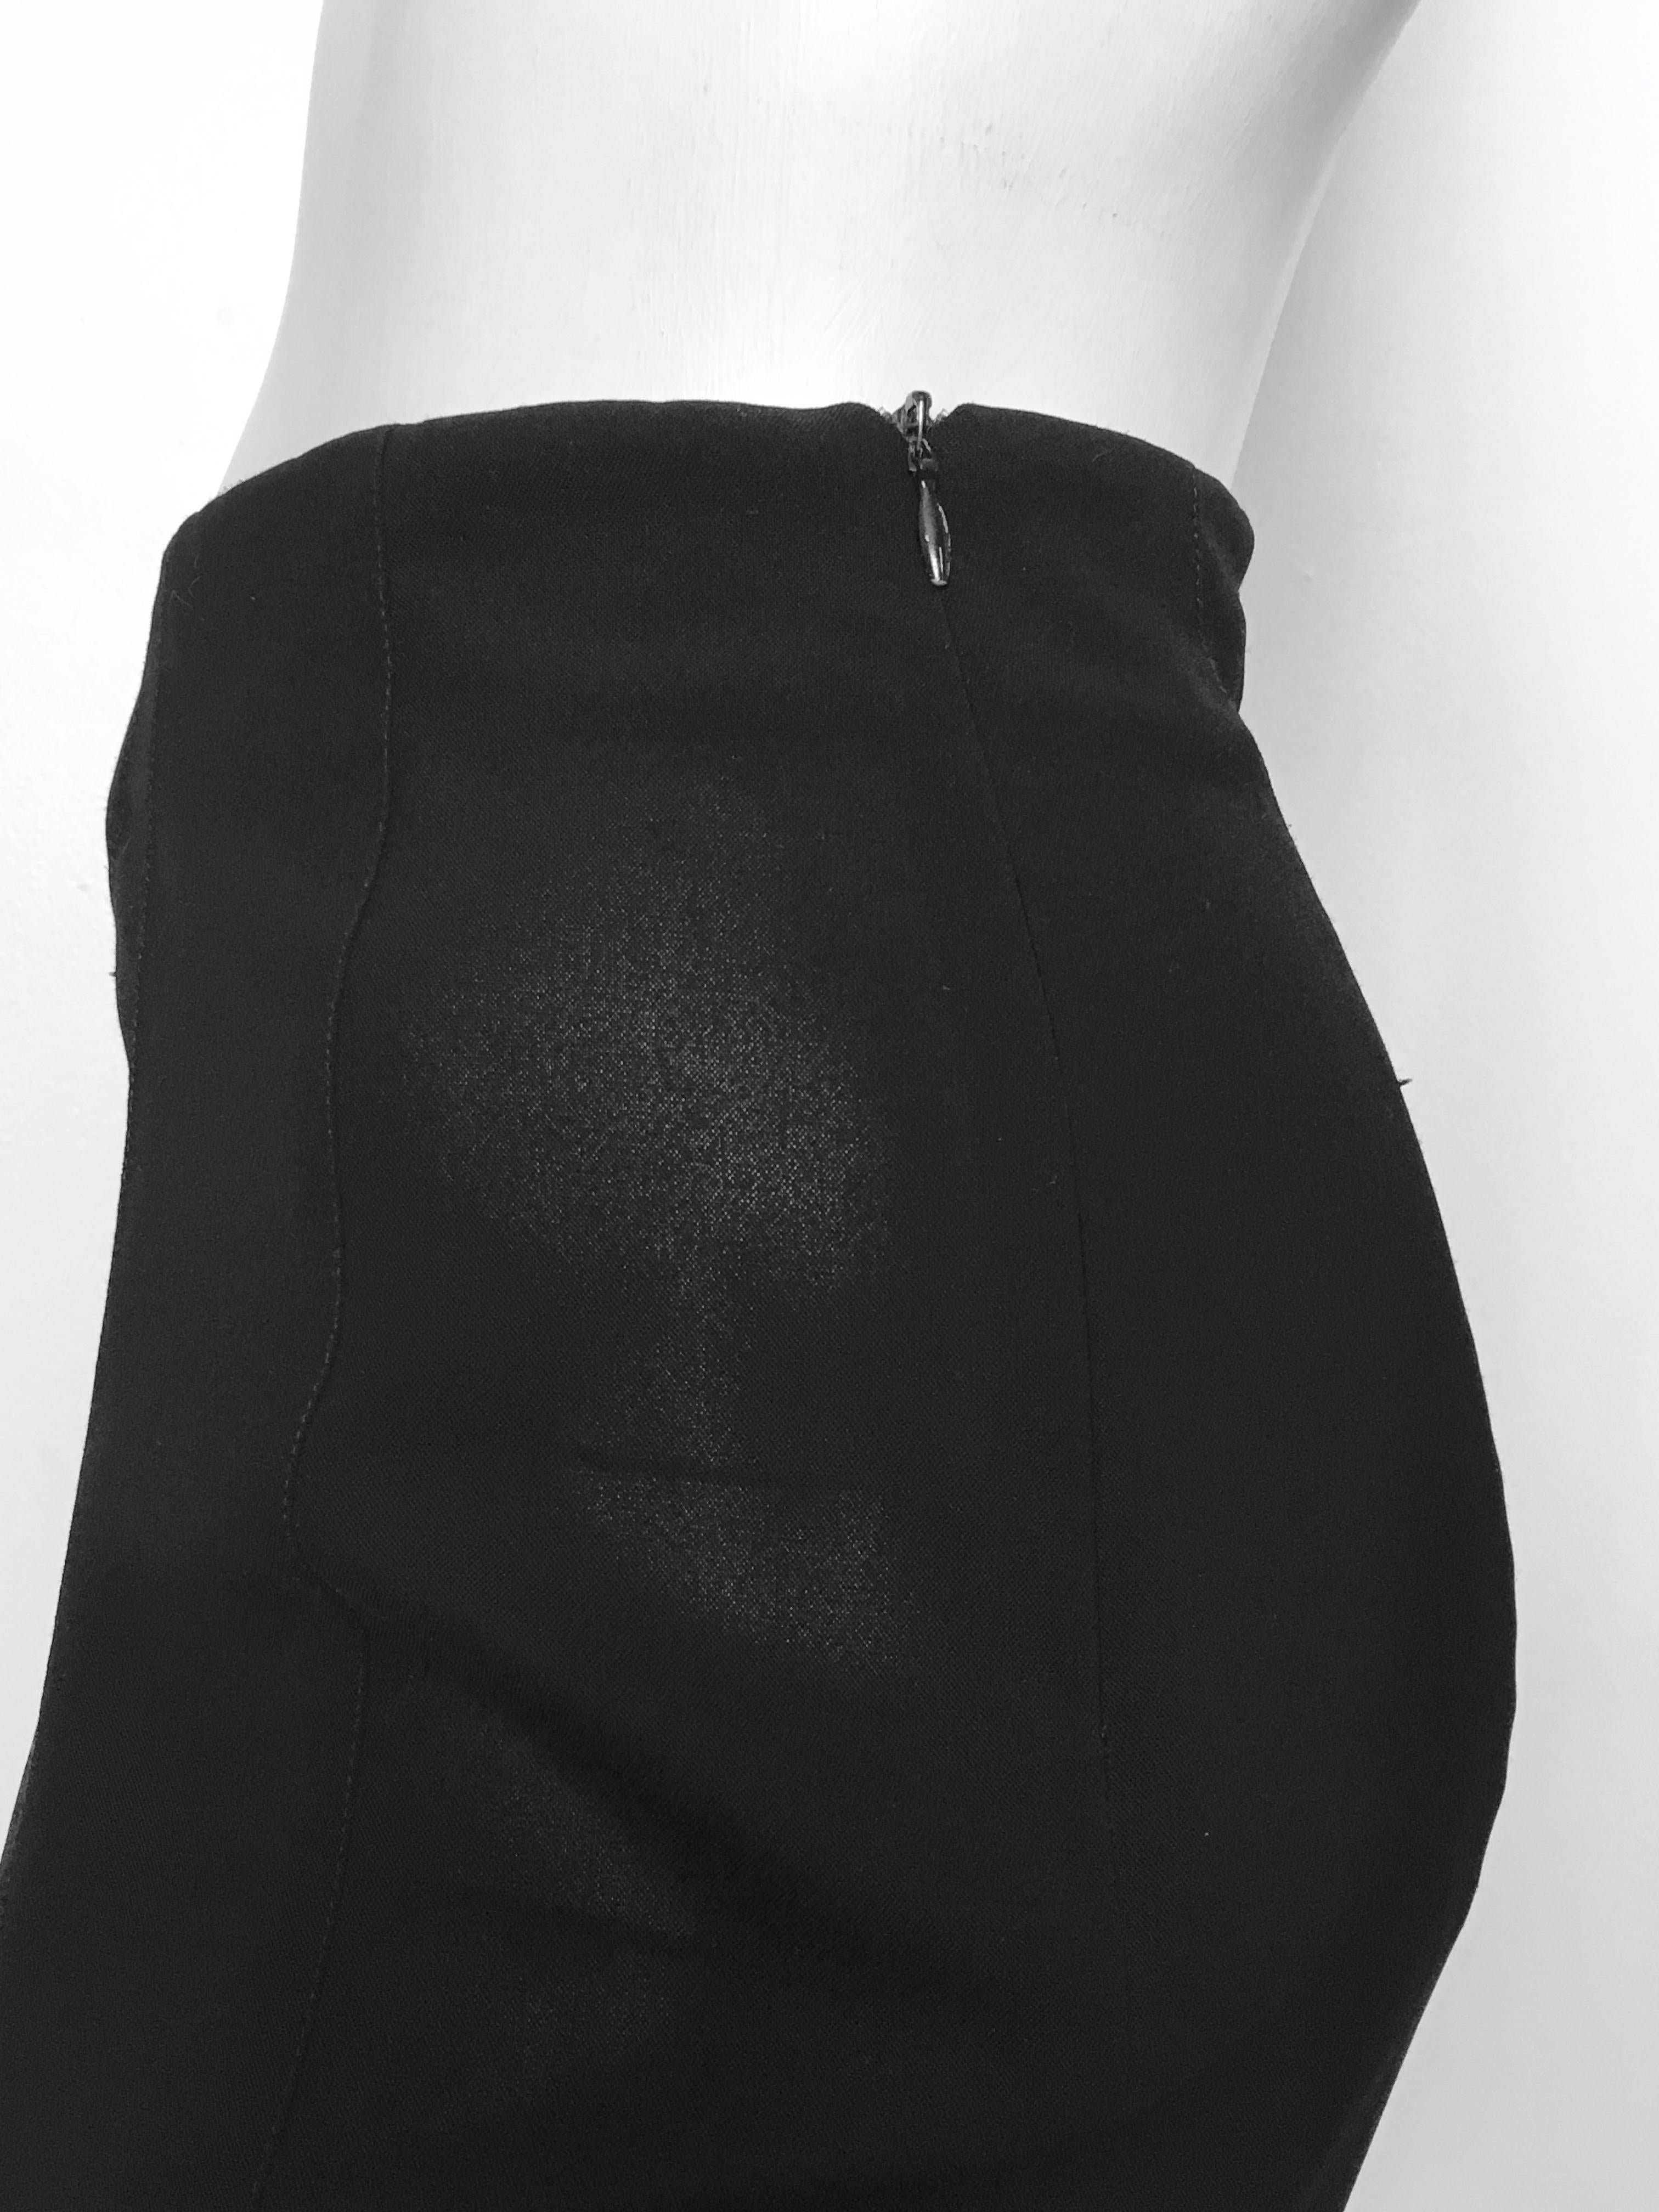 Donna Karan 1990s Black Sheer Skirt Size 8, made in Italy. For Sale 7